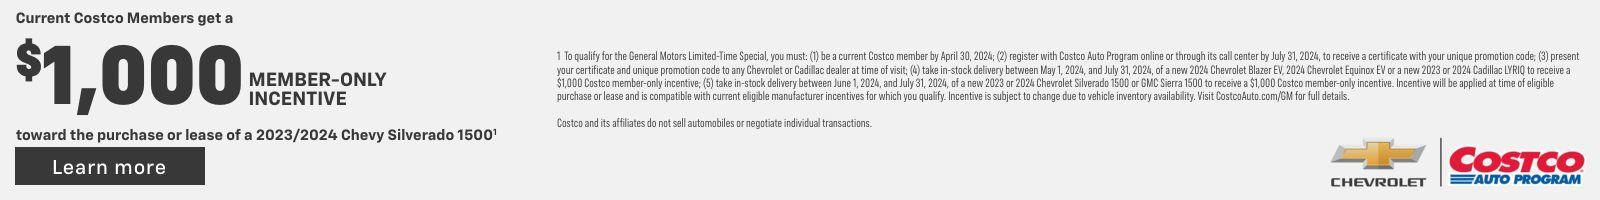 2024 Chevy Silverado 1500 Crew Cab. Accept all challenges. Current Costco members get a $1,000 member-only incentive toward the purchase or lease of a 2024 Silverado 1500 Crew Cab.